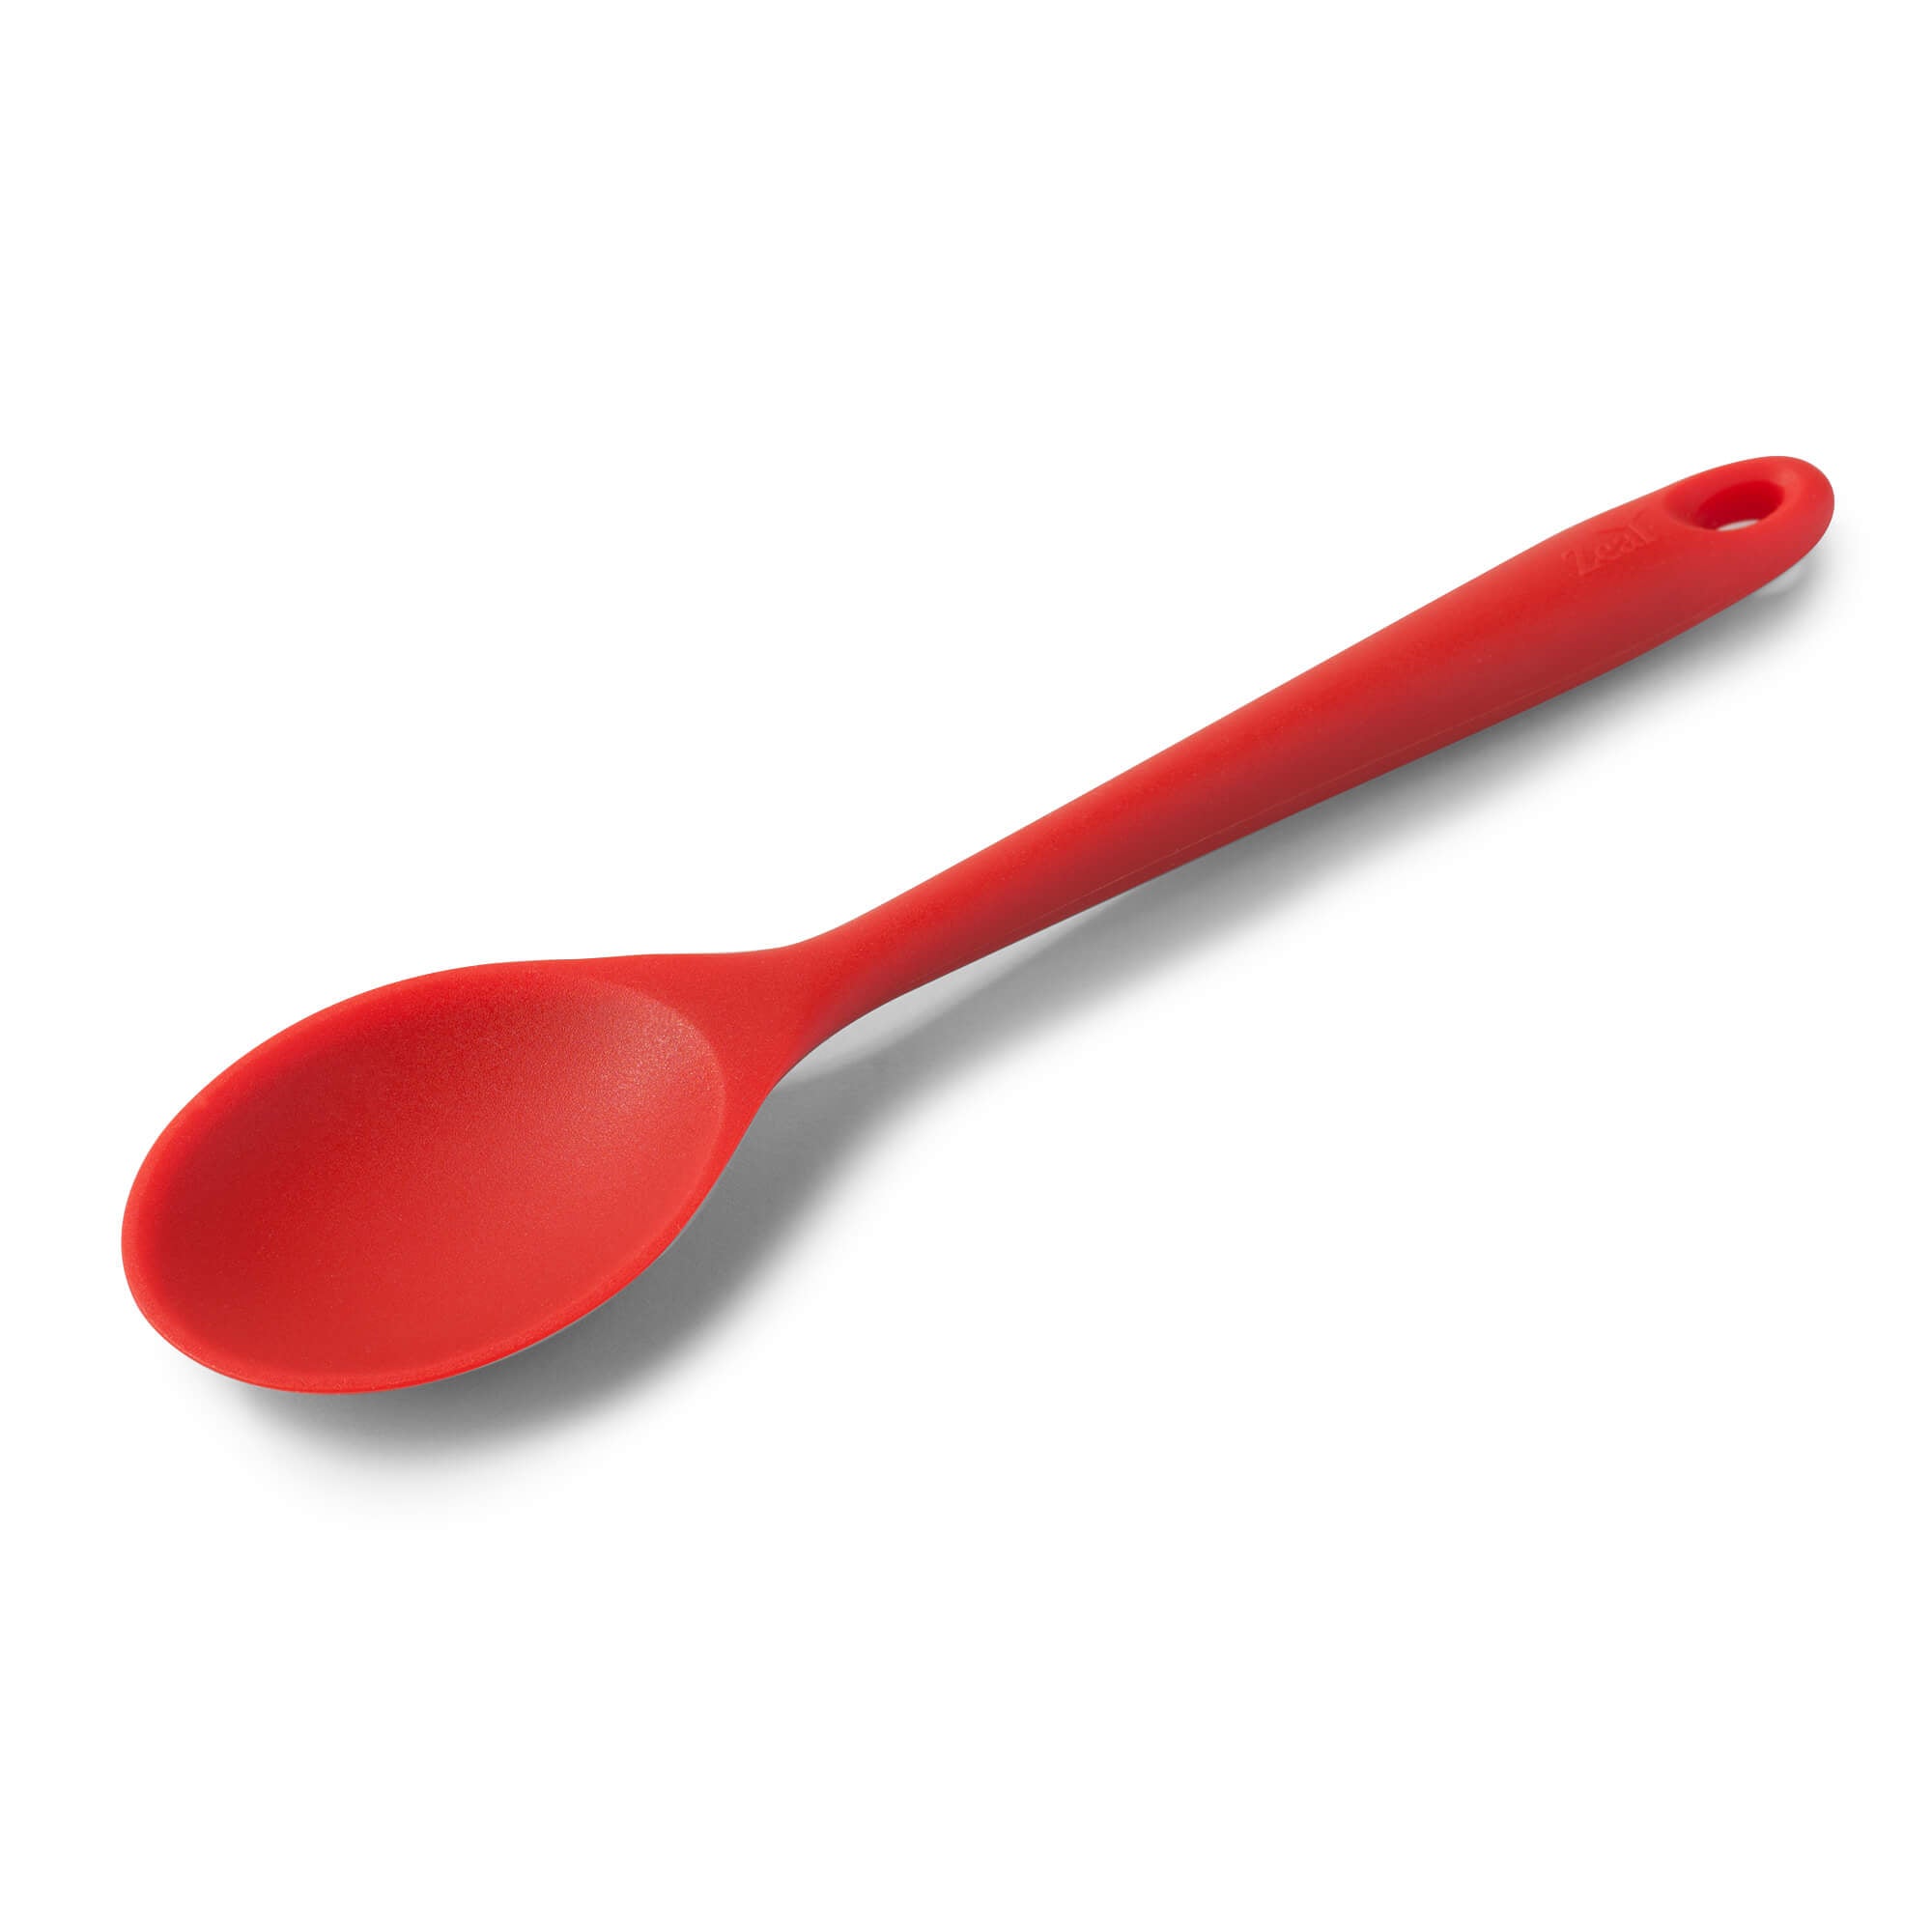 Zeal Silicone Cook’s Spoon in Red